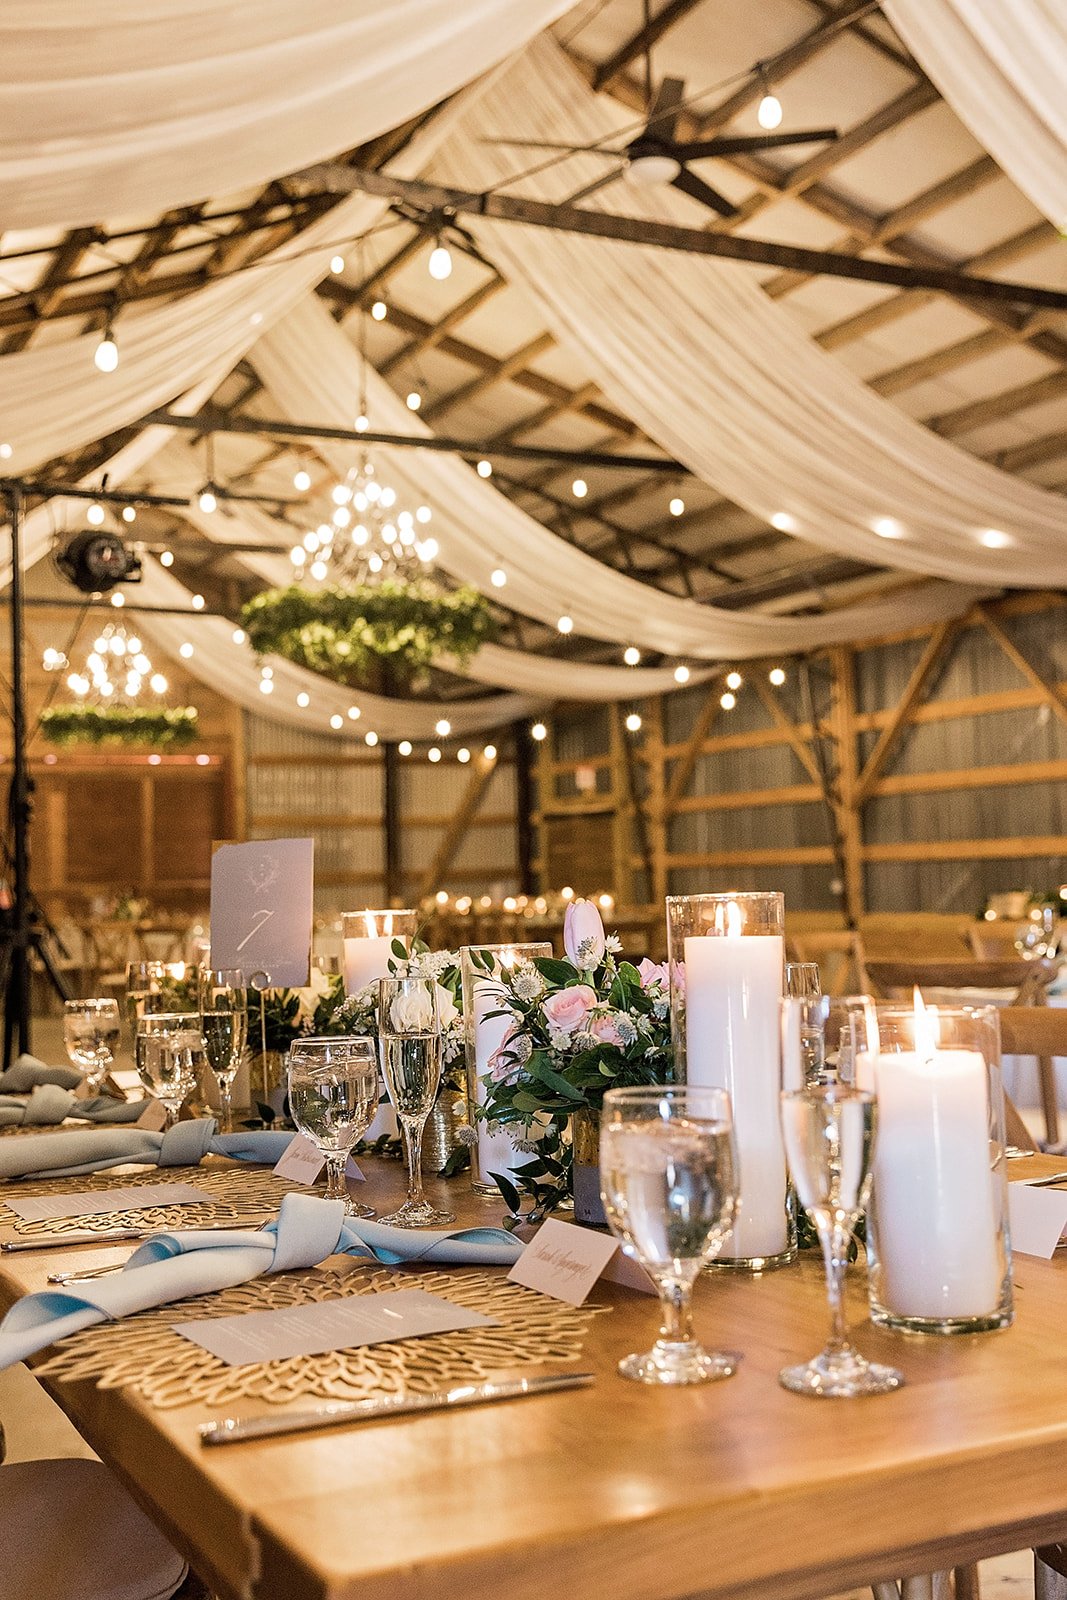 CBI - Barn with tablescape and ceiling install .jpg